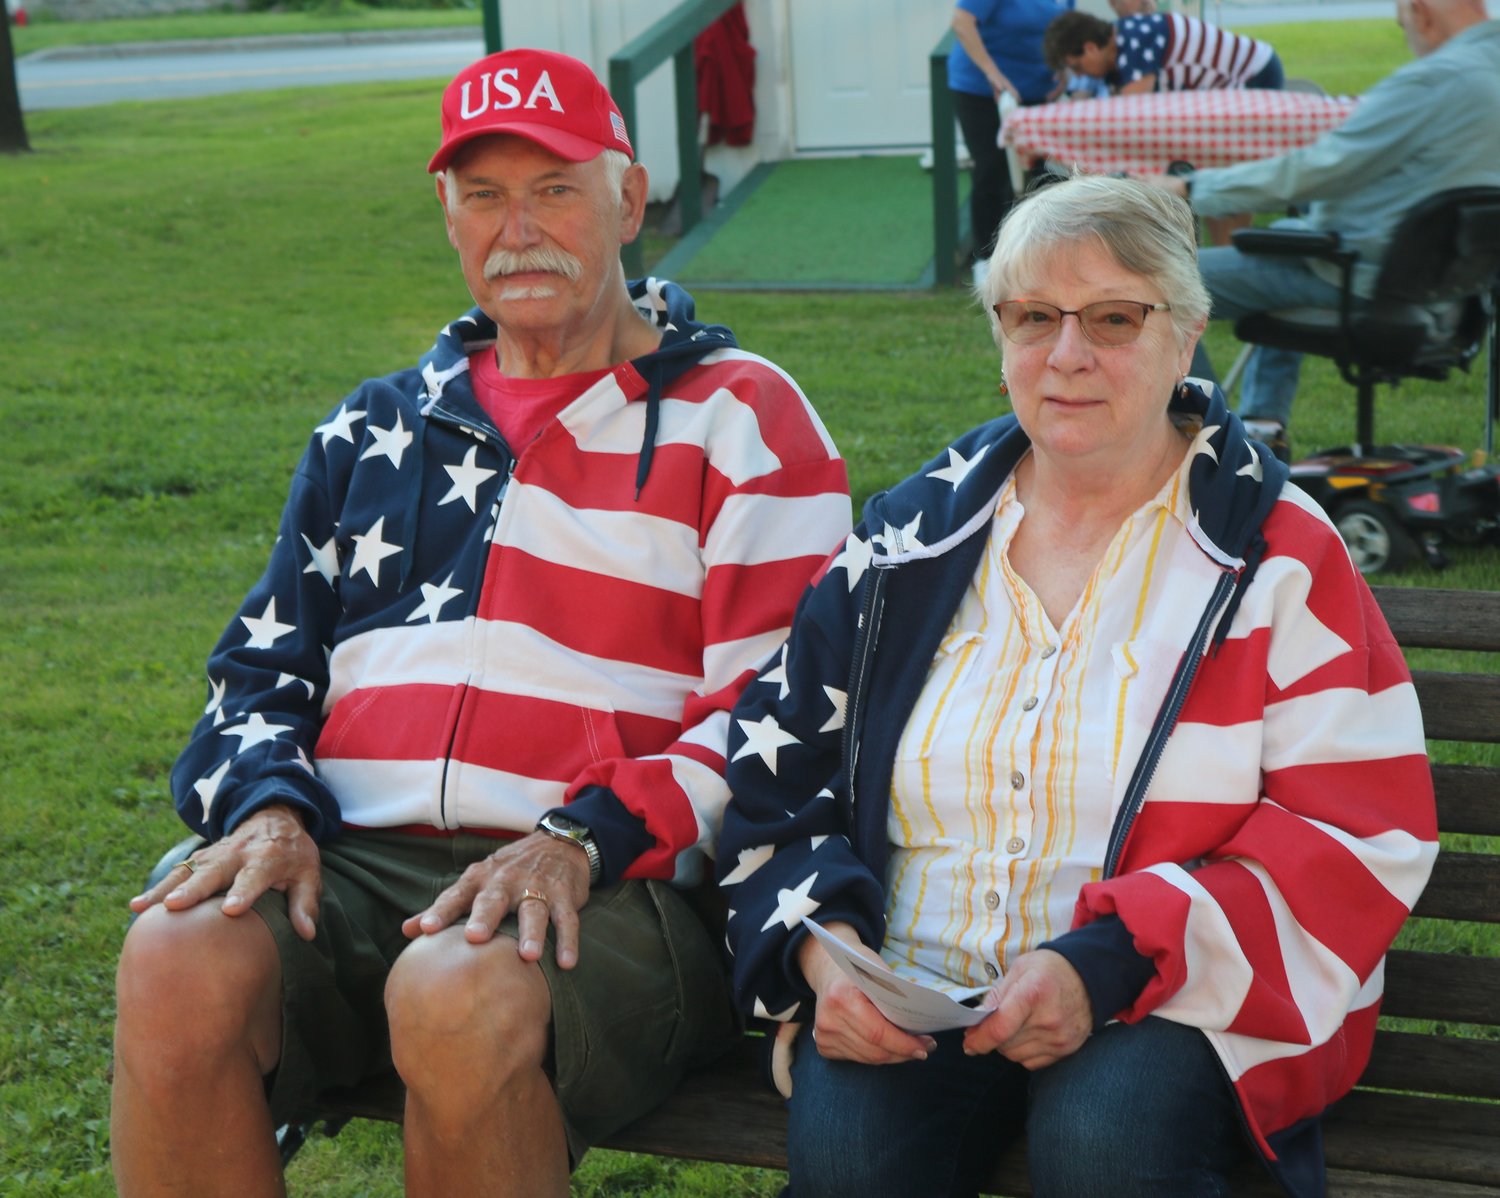 John and Sue Hennessey of Boonville were dressed in patriotic attire for the Elks’ Flag Day ceremony. John is a nephew of Harland J. Hennessey. Harland, who died on Nov. 1, 1942 at age 24. was the first serviceman from our area to die for our country in World War II. The Harland J. Hennessey VFW Post, named in his honor, was organized on Jan. 1, 1946.